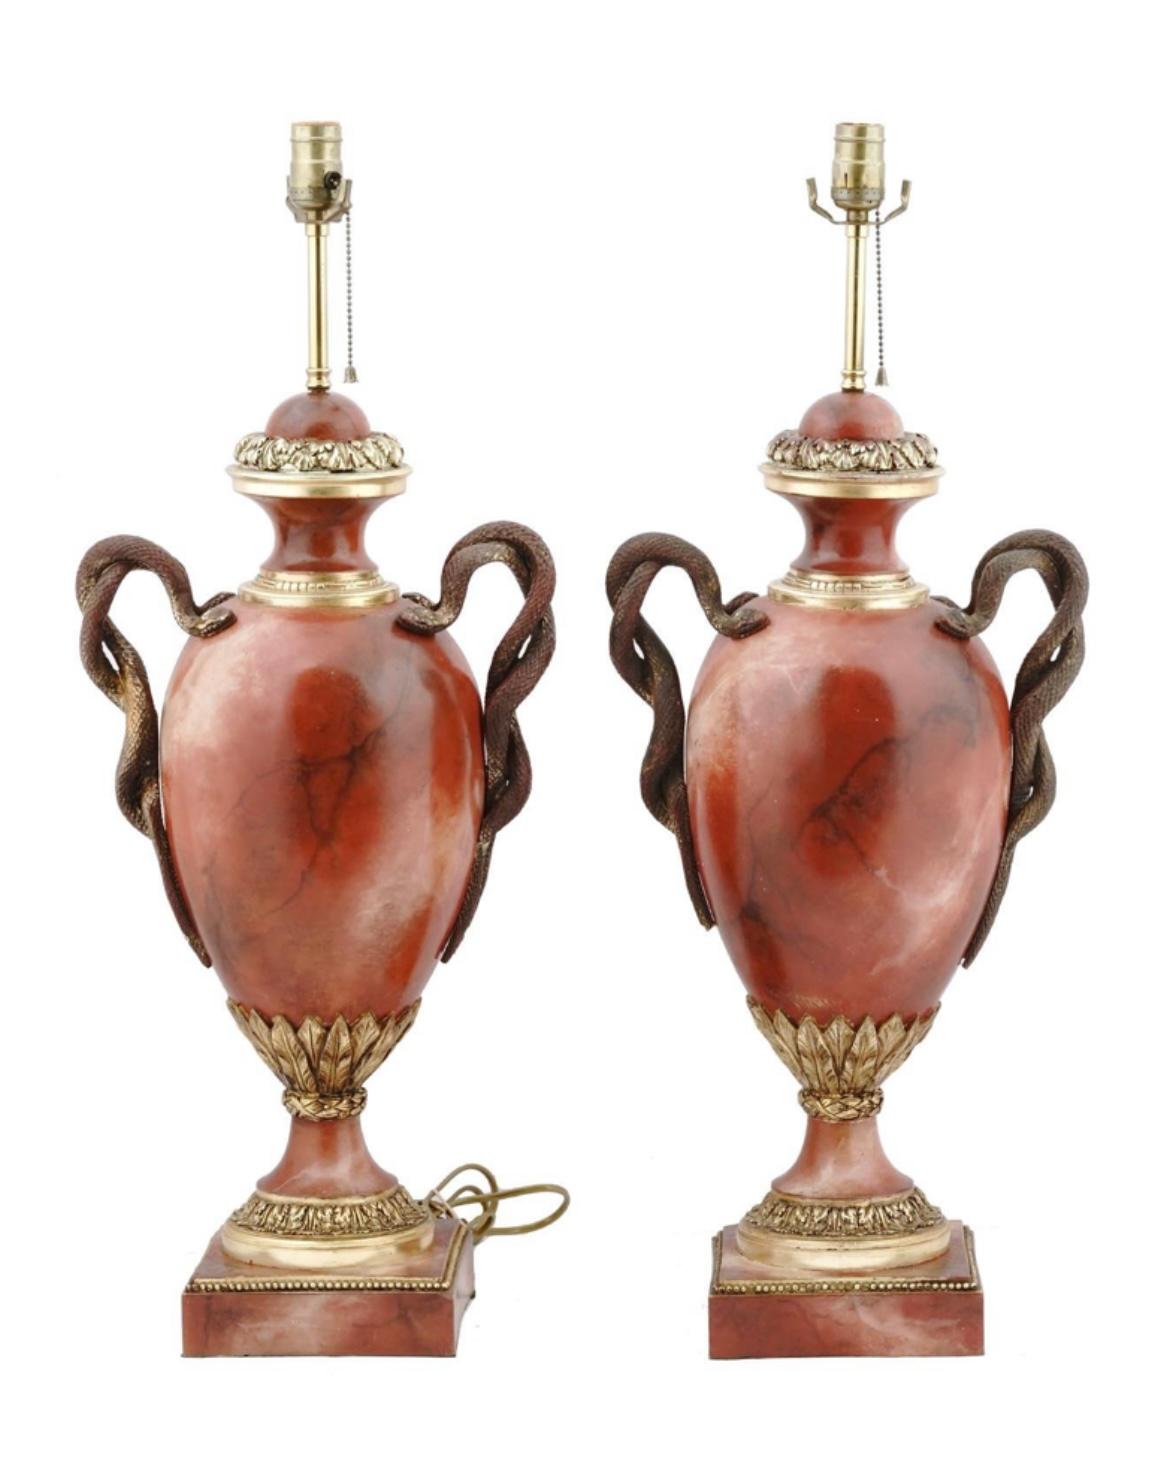 Pair of very large (31 inch) vintage table lamps from the prestigious firm of Thomas Blakemore Ltd., formerly of Walsall, England, near Staffordshire.  Crafted from cast and carved composition with hand-painted finish to mimic the appearance of